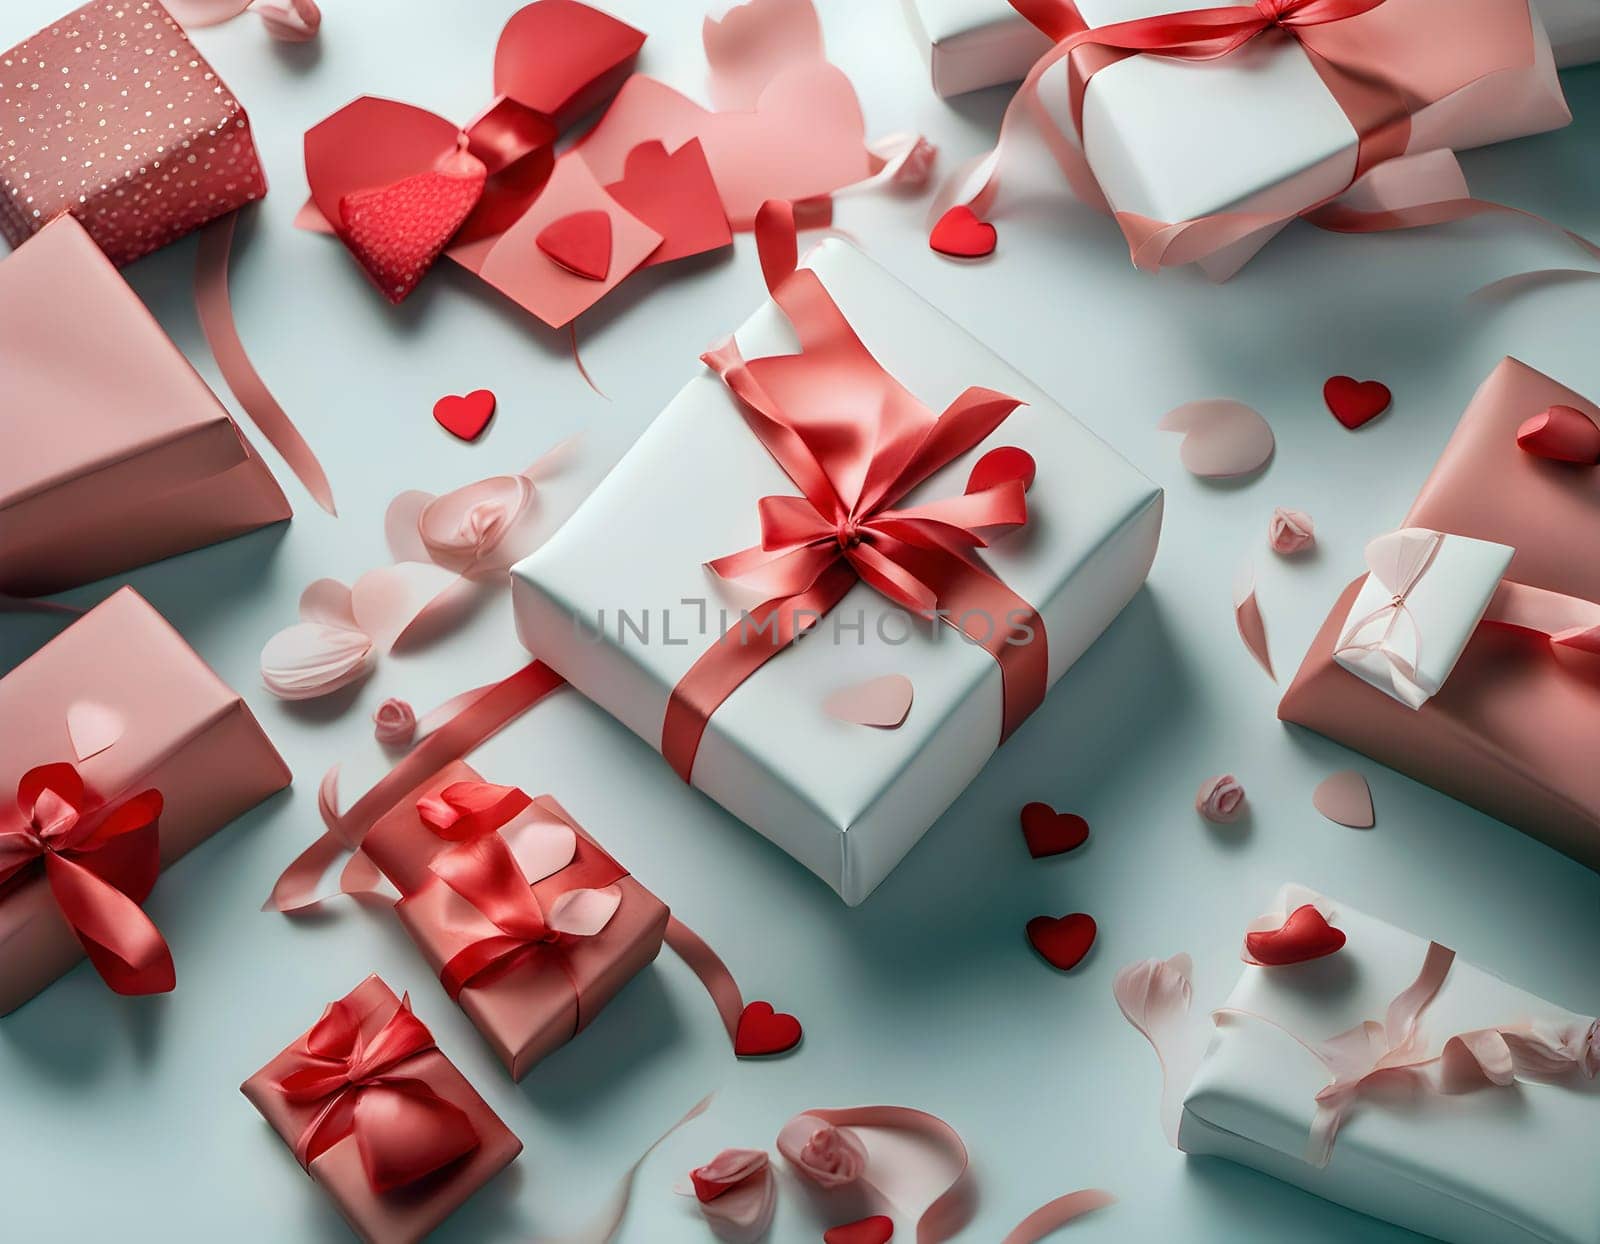 Assortment of Elegant Gift Boxes with Heart Decorations Created by artificial intelligence